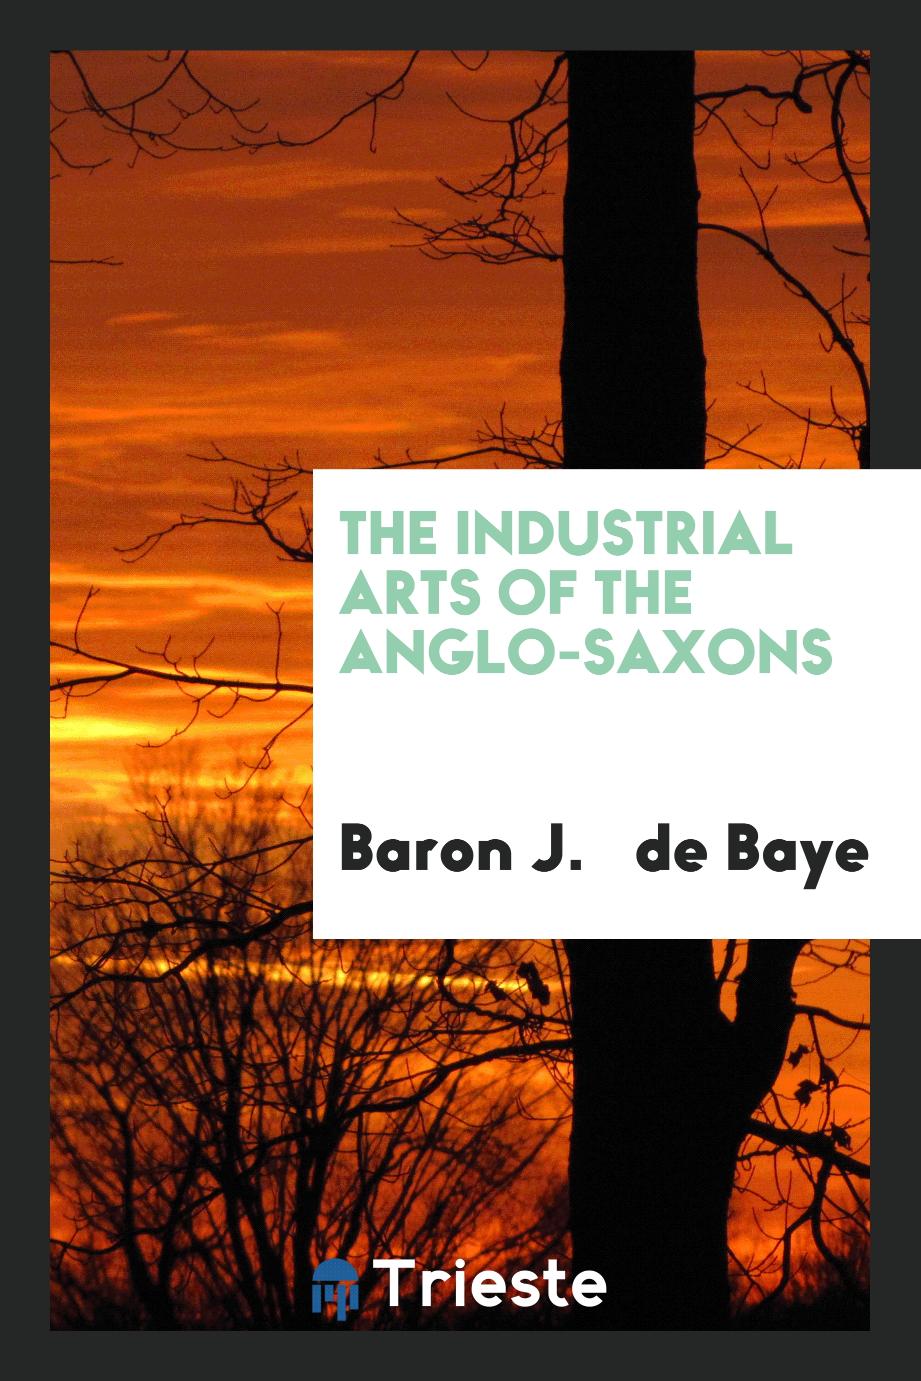 The industrial arts of the Anglo-Saxons